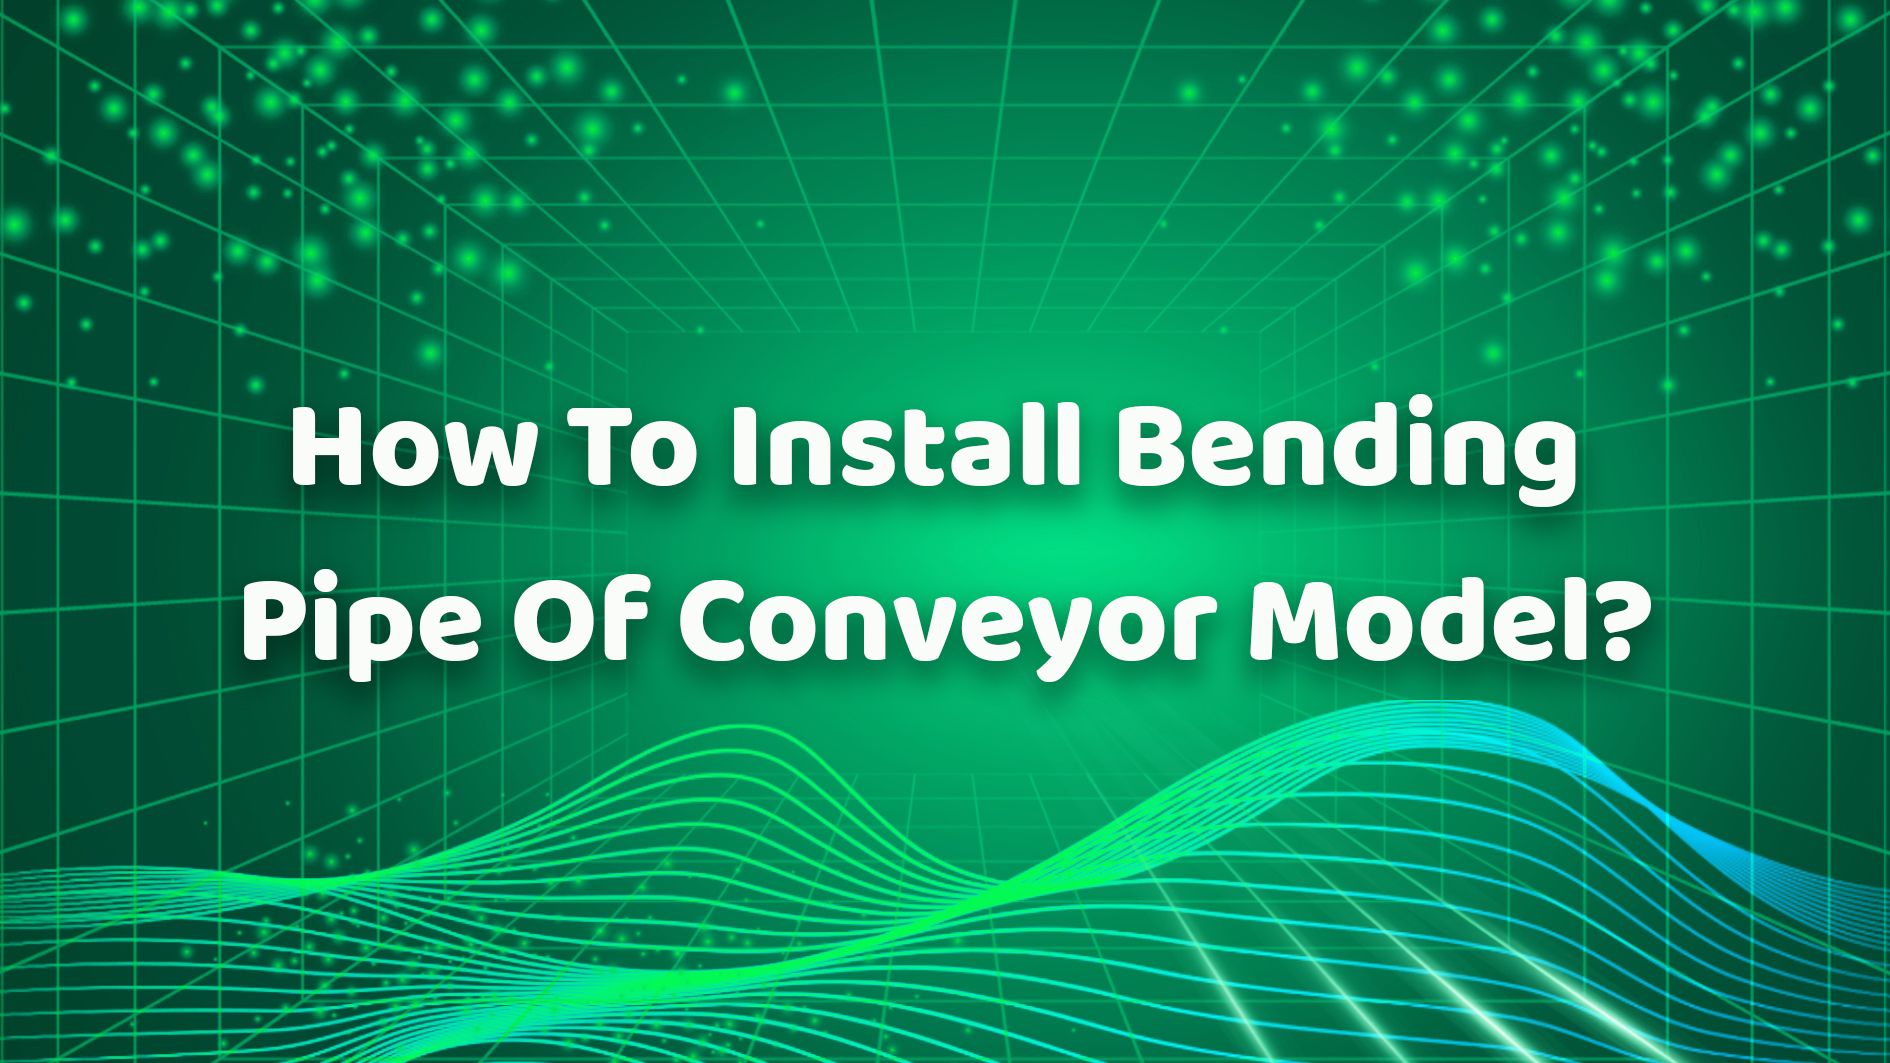 How To Install Bending Pipe Of Conveyor Model？